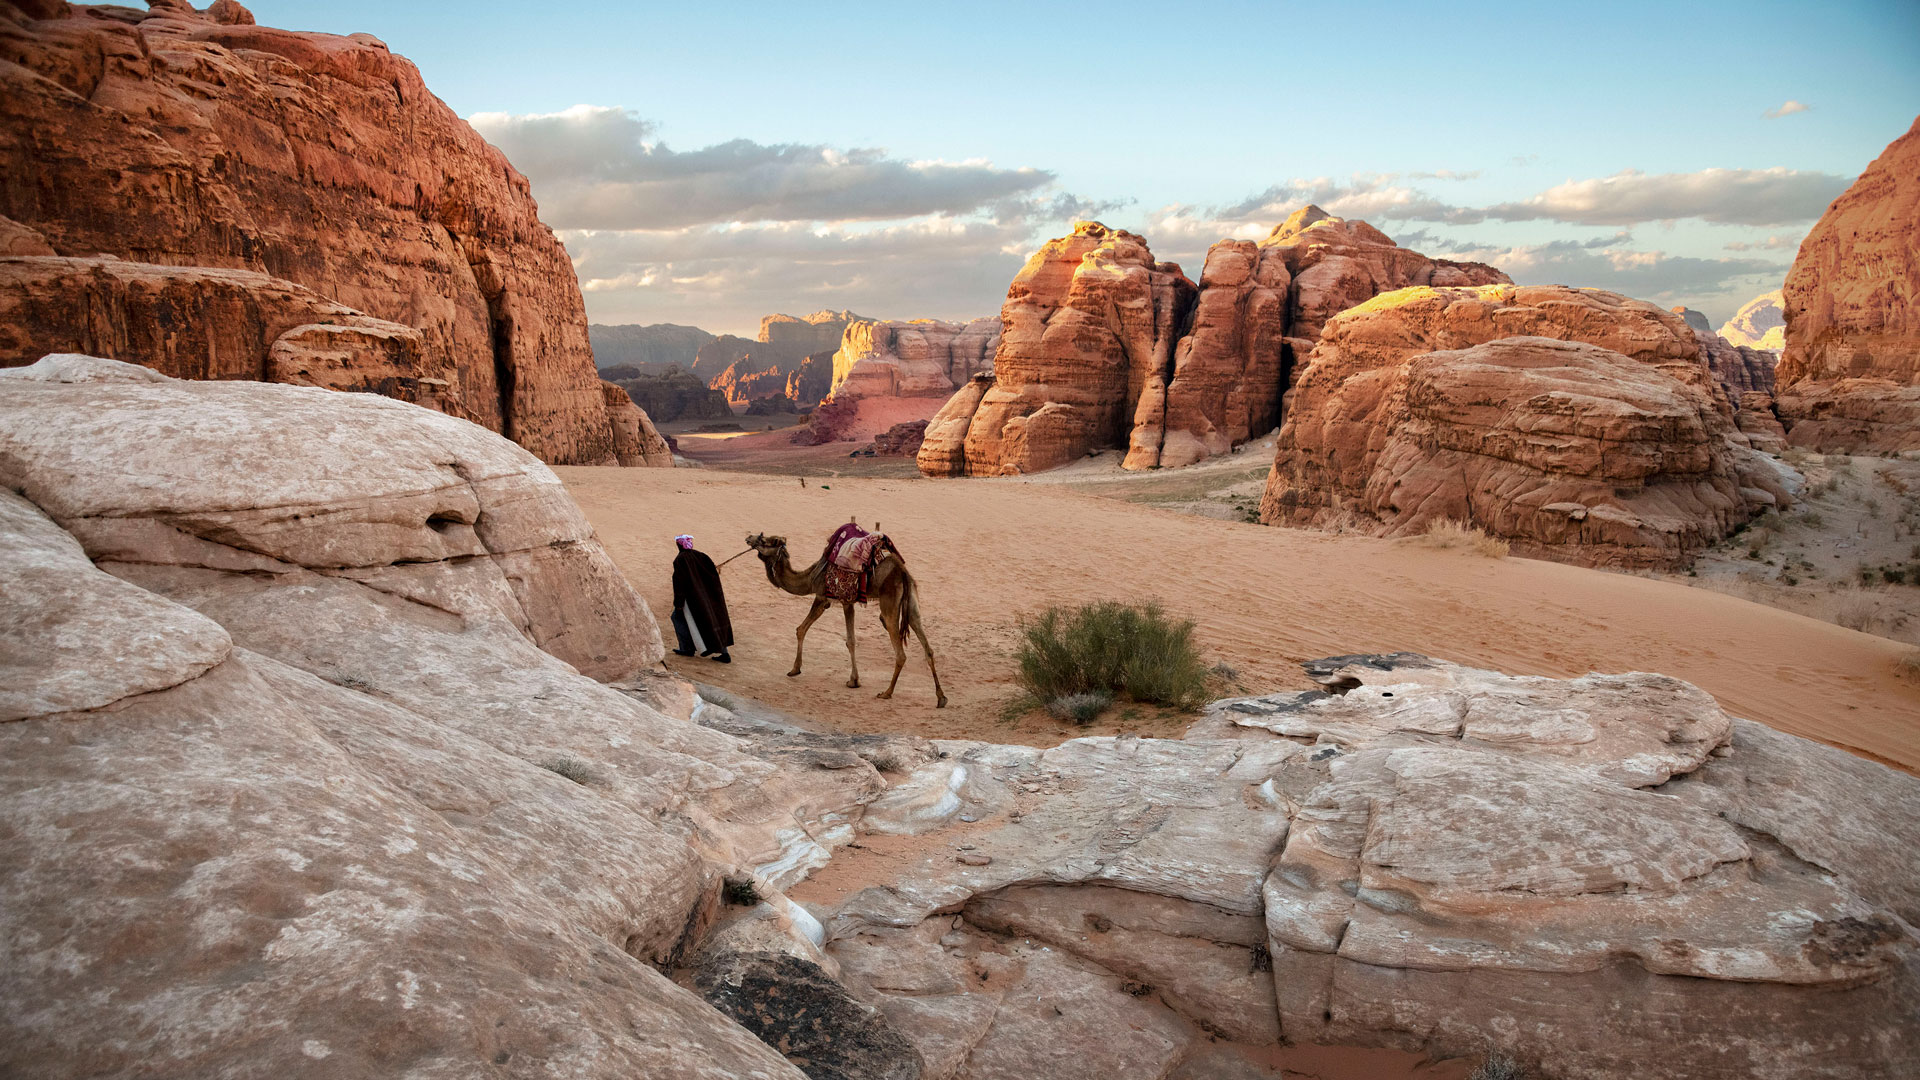 A desert scene featuring a man leading a camel through a red, rocky landscape.